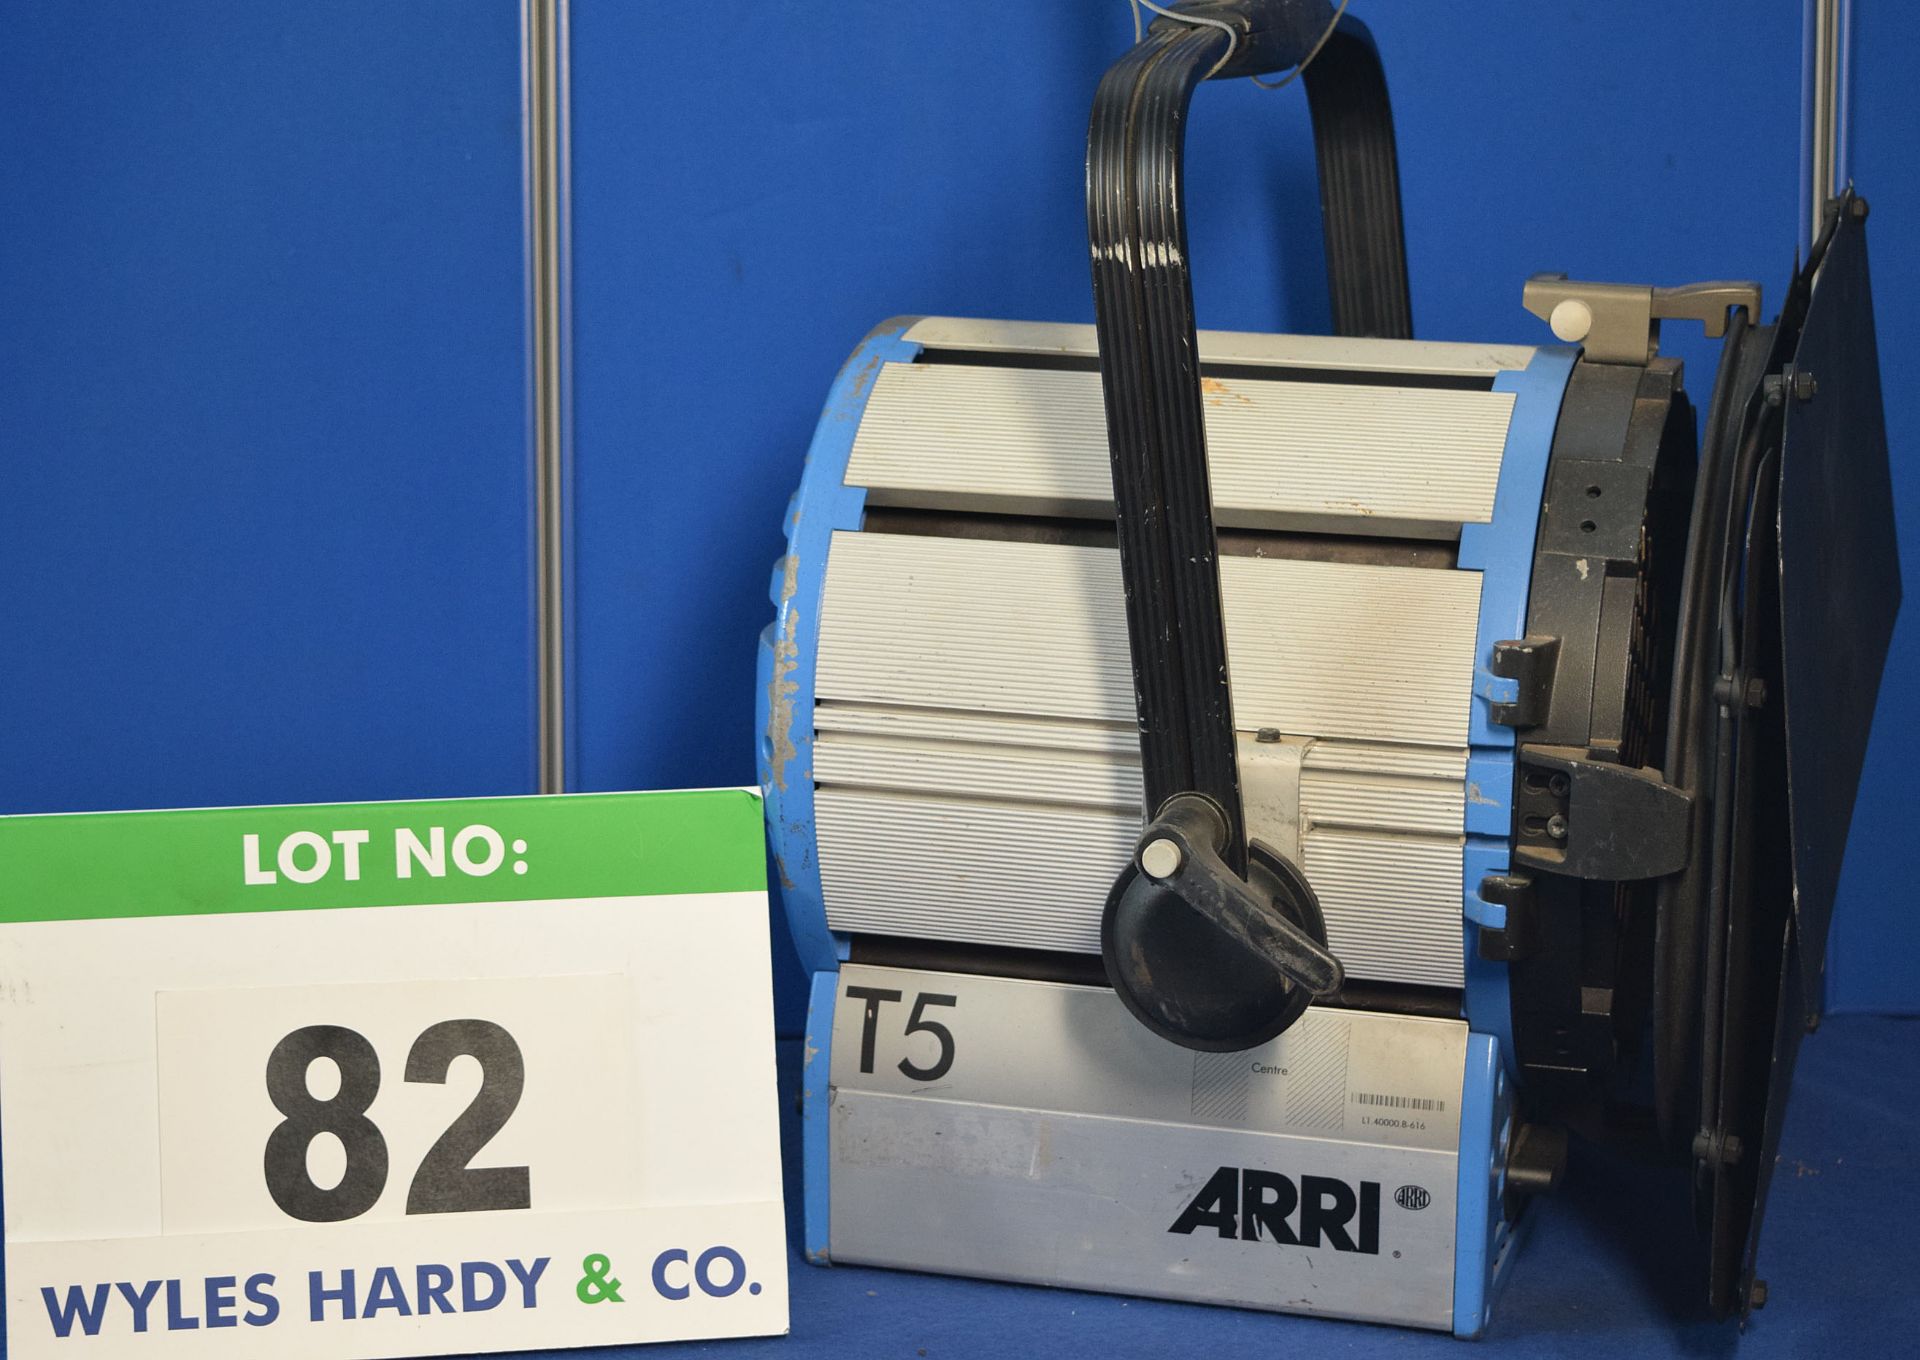 An ARRI T5 5000W Light with fitted Barn Doors and Stirrup Mount